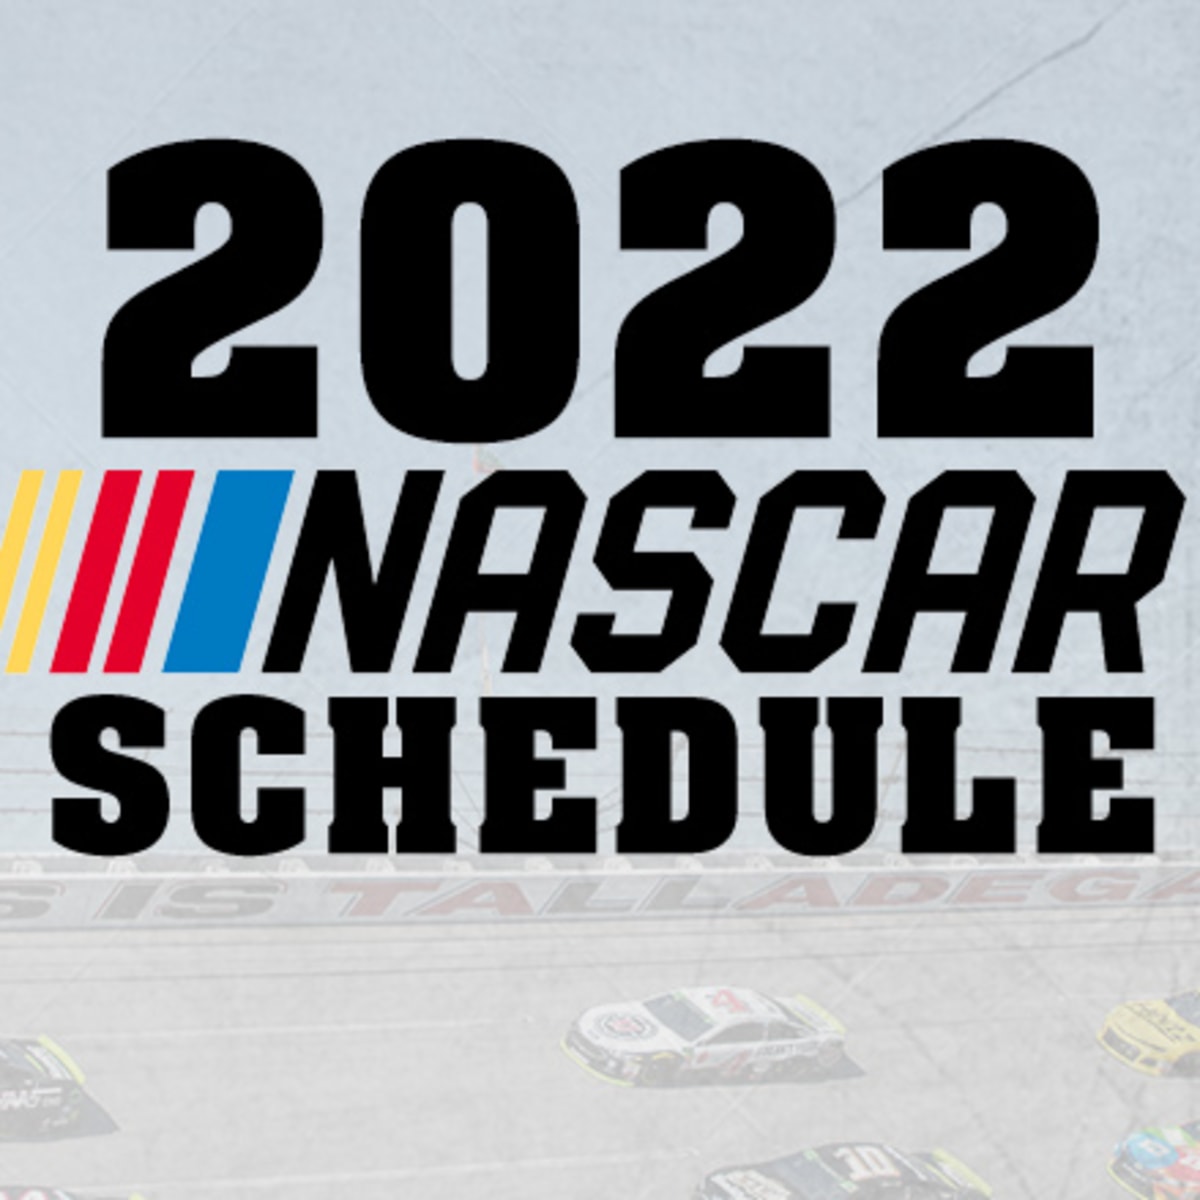 Nascar Race Schedule For 2022 2022 Nascar Schedule: Nascar Cup Series - Athlonsports.com | Expert  Predictions, Picks, And Previews